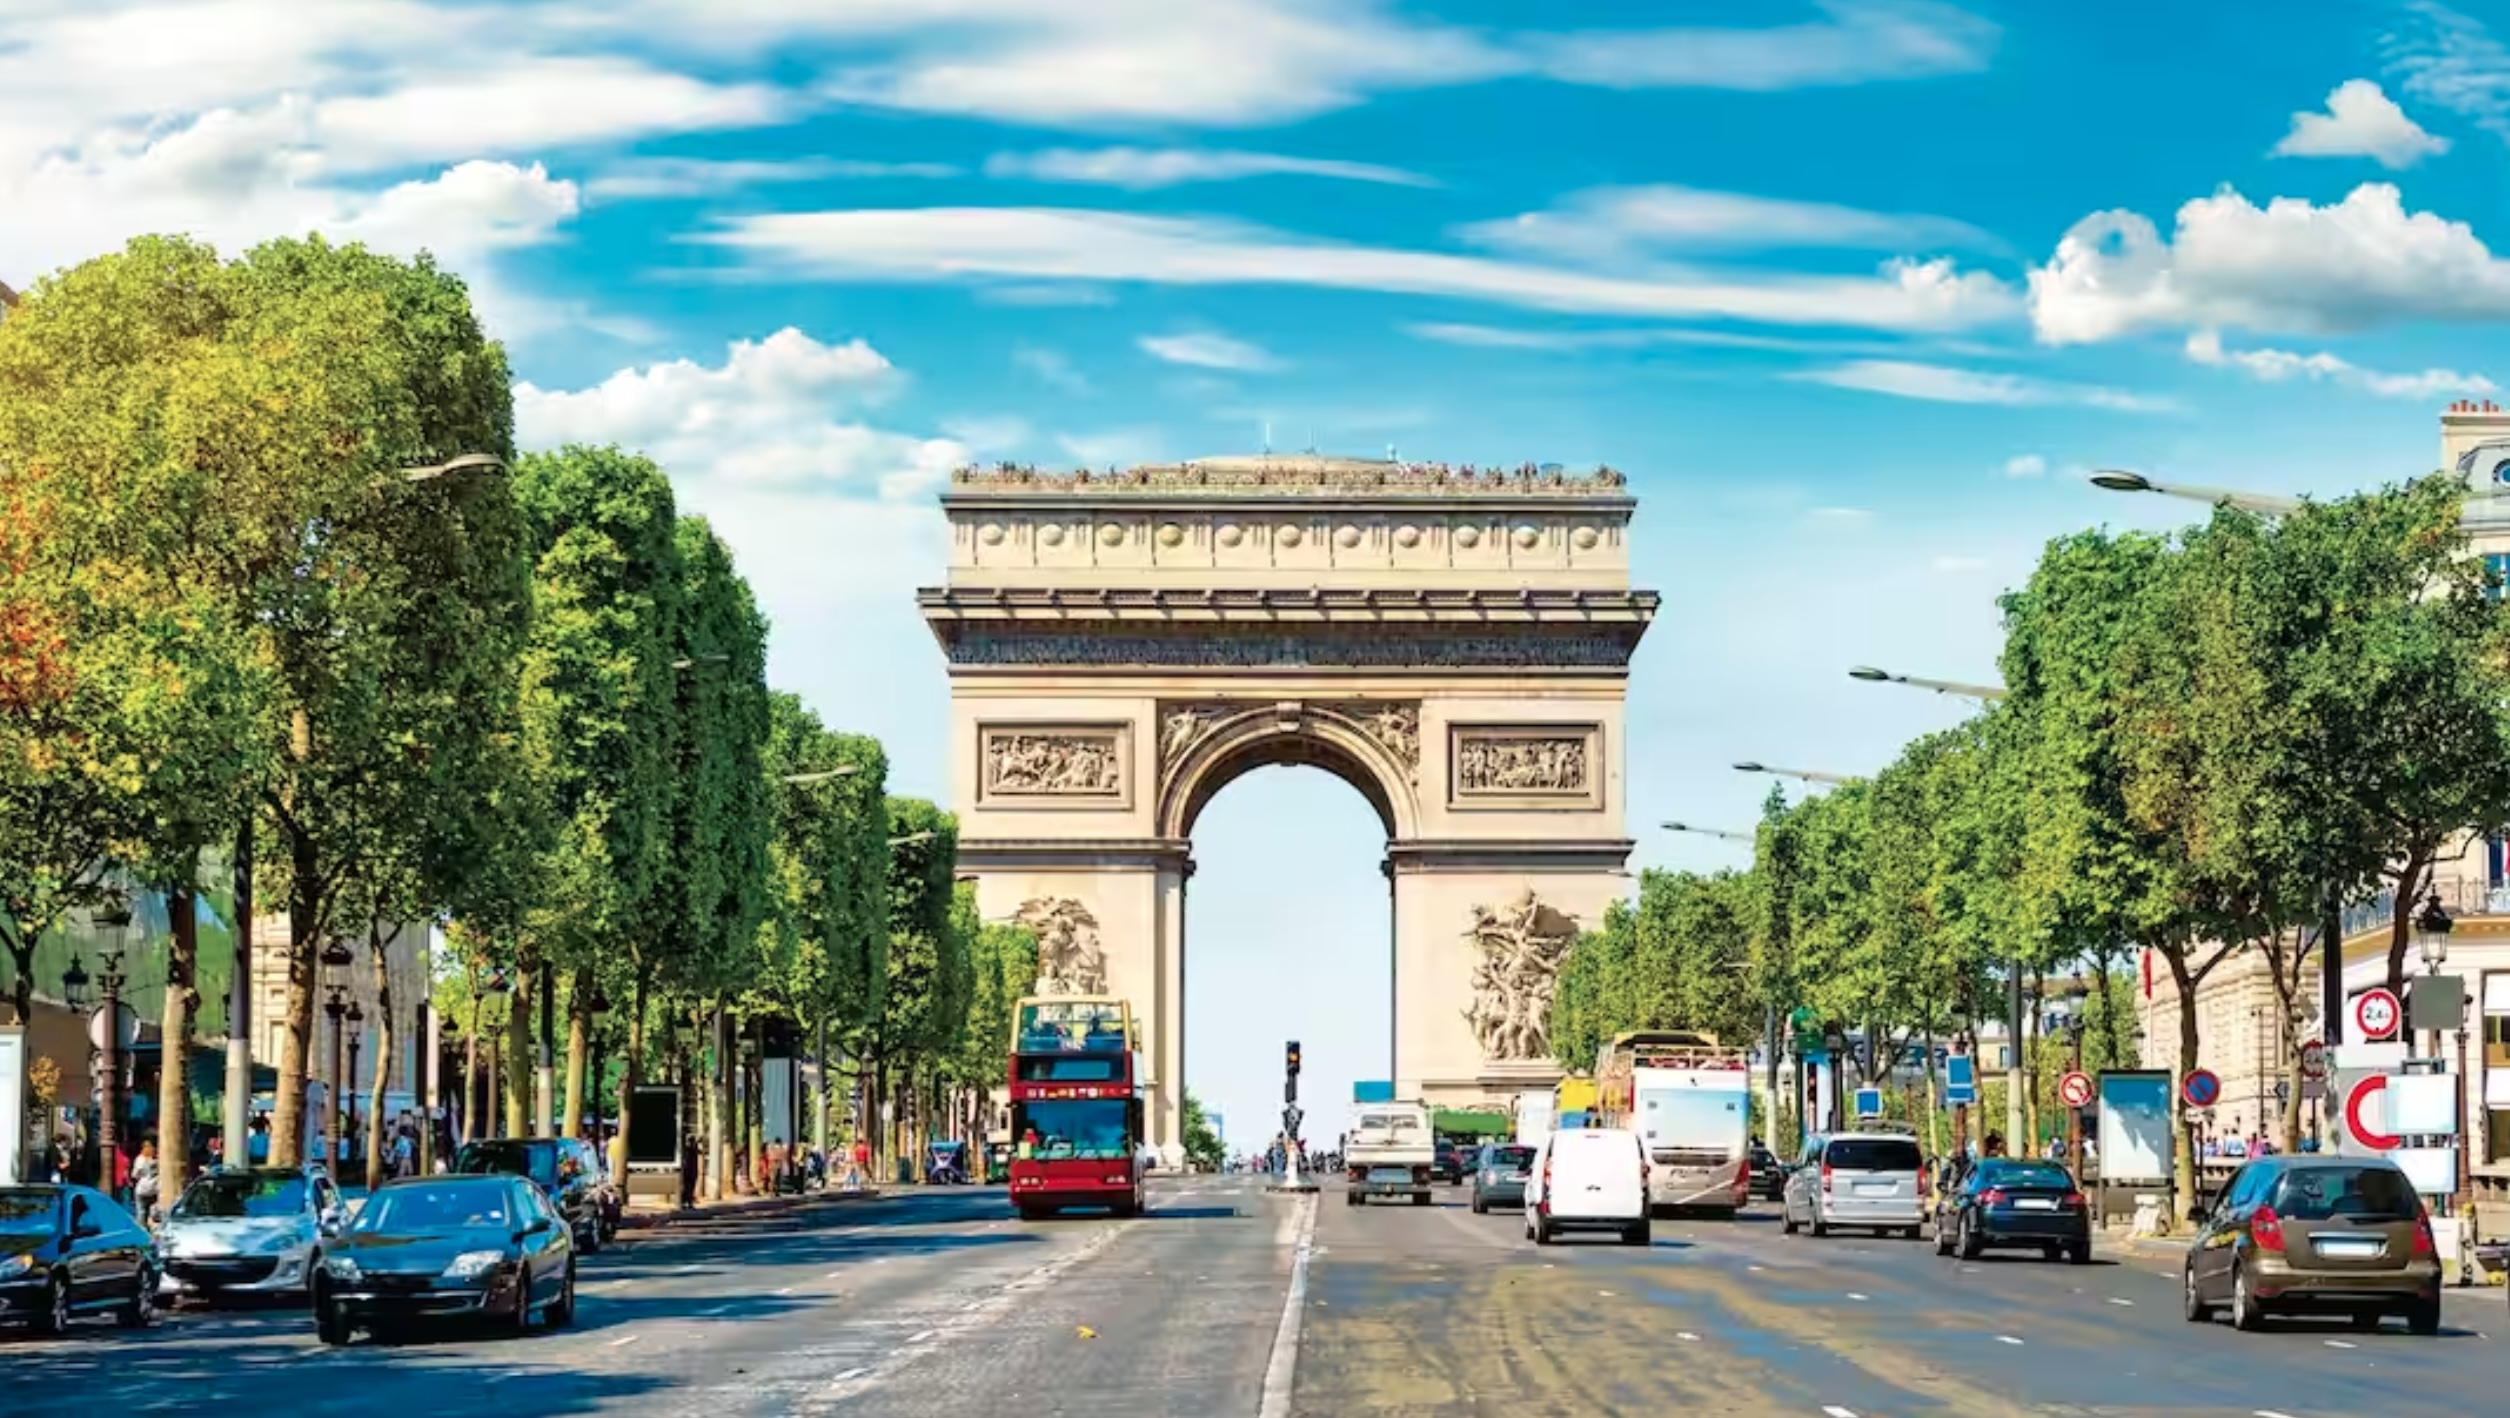 Champs Elysee leading to Arc de Triomphe in Paris, France